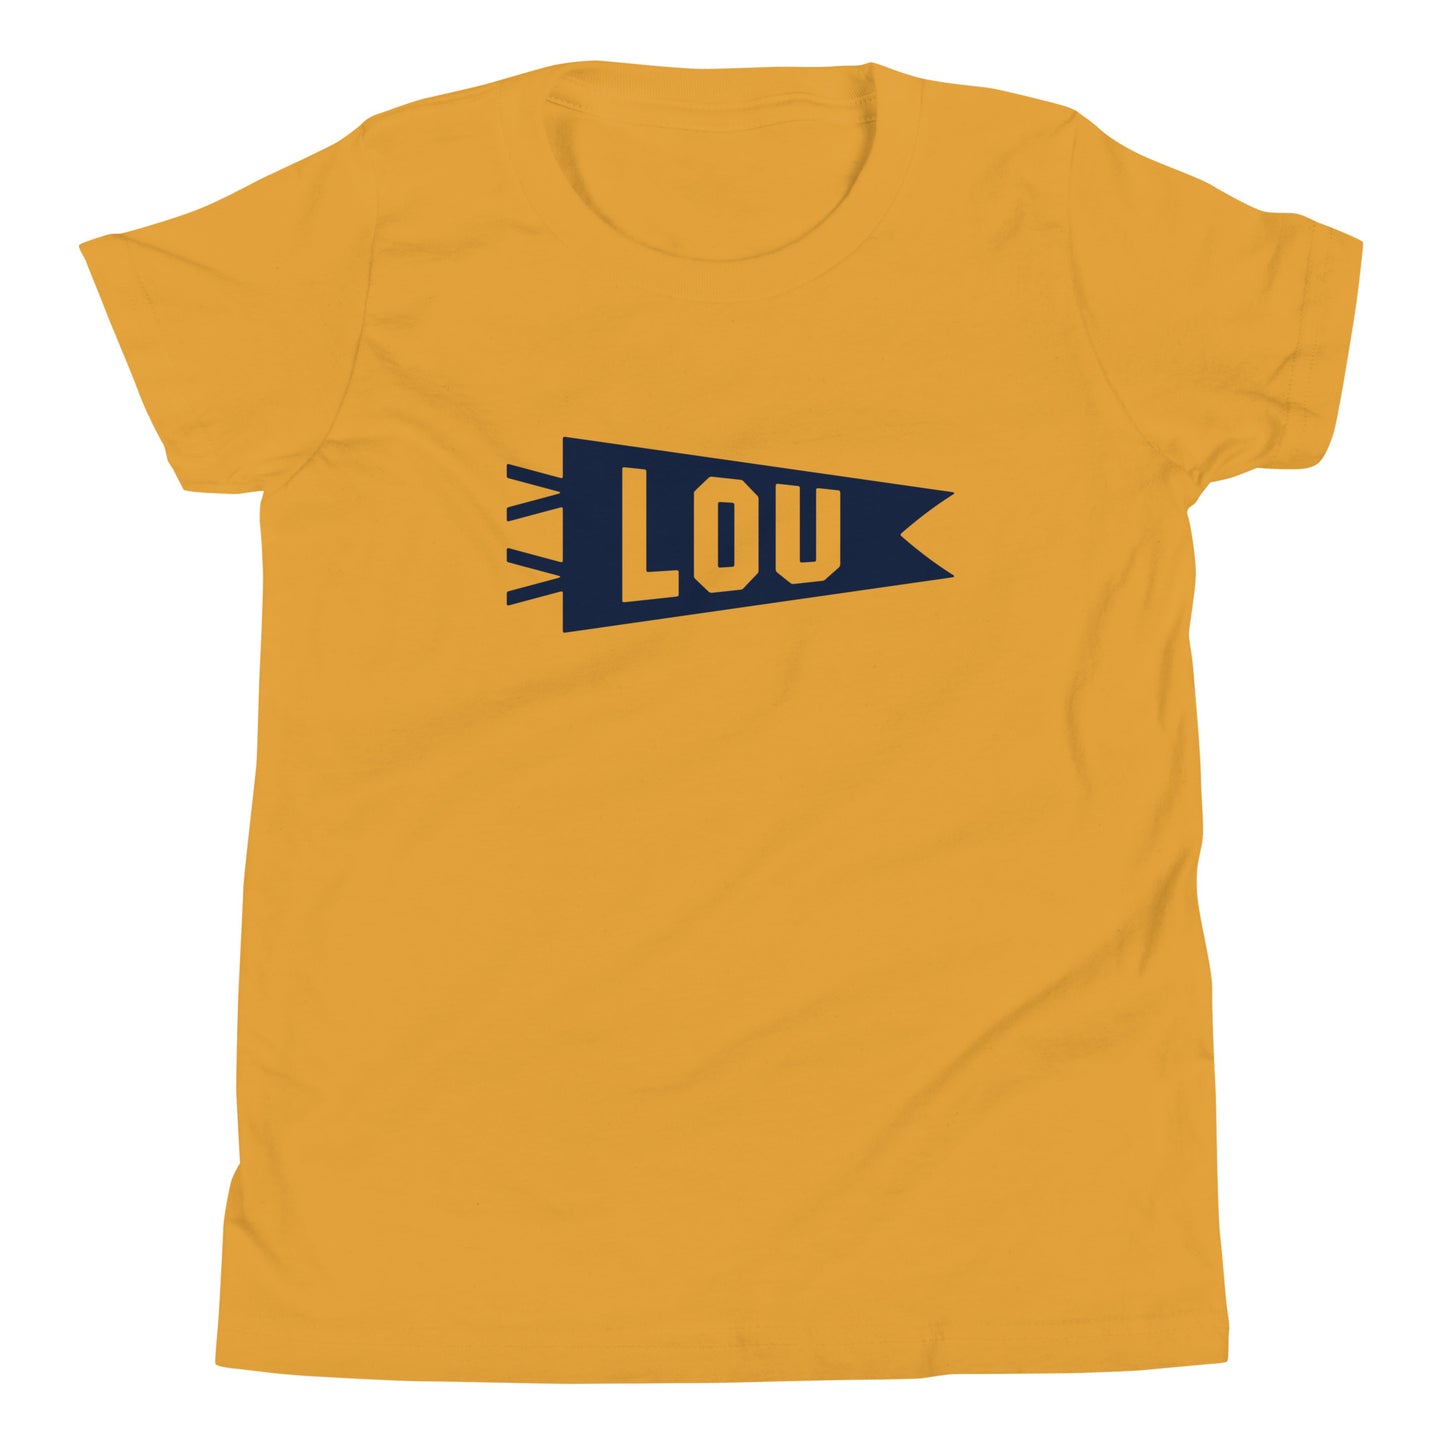 Kid's Airport Code Tee - Navy Blue Graphic • LOU Louisville • YHM Designs - Image 02